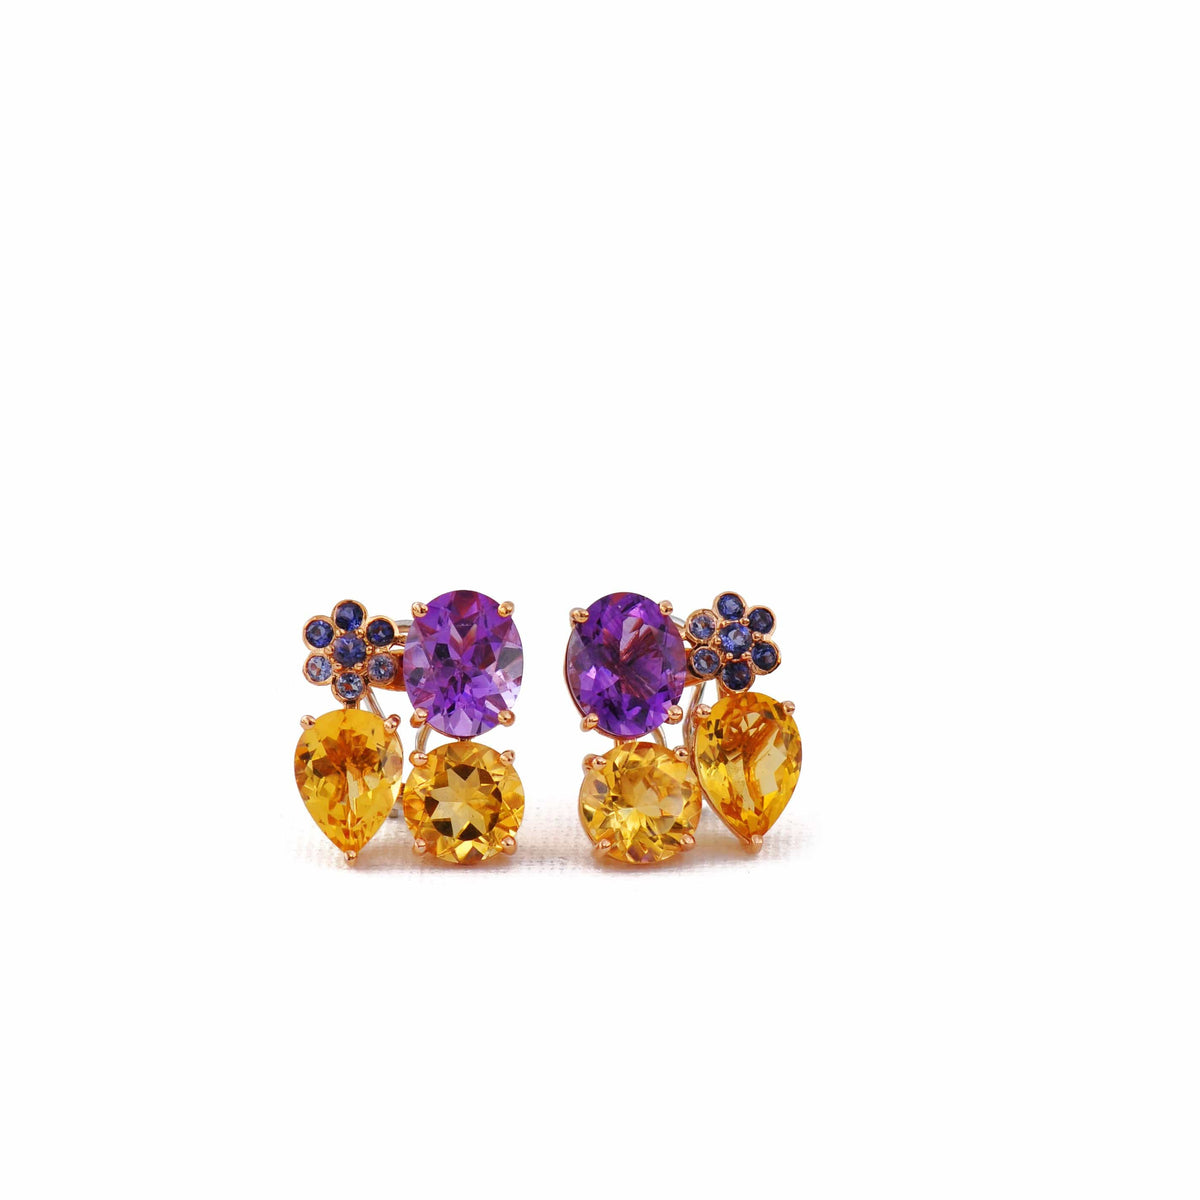 18 Karat Amber Hue Gold Gemstones Earrings – Hollywood Royalty Earrings - Chris Aire Fine Jewelry & Timepieces